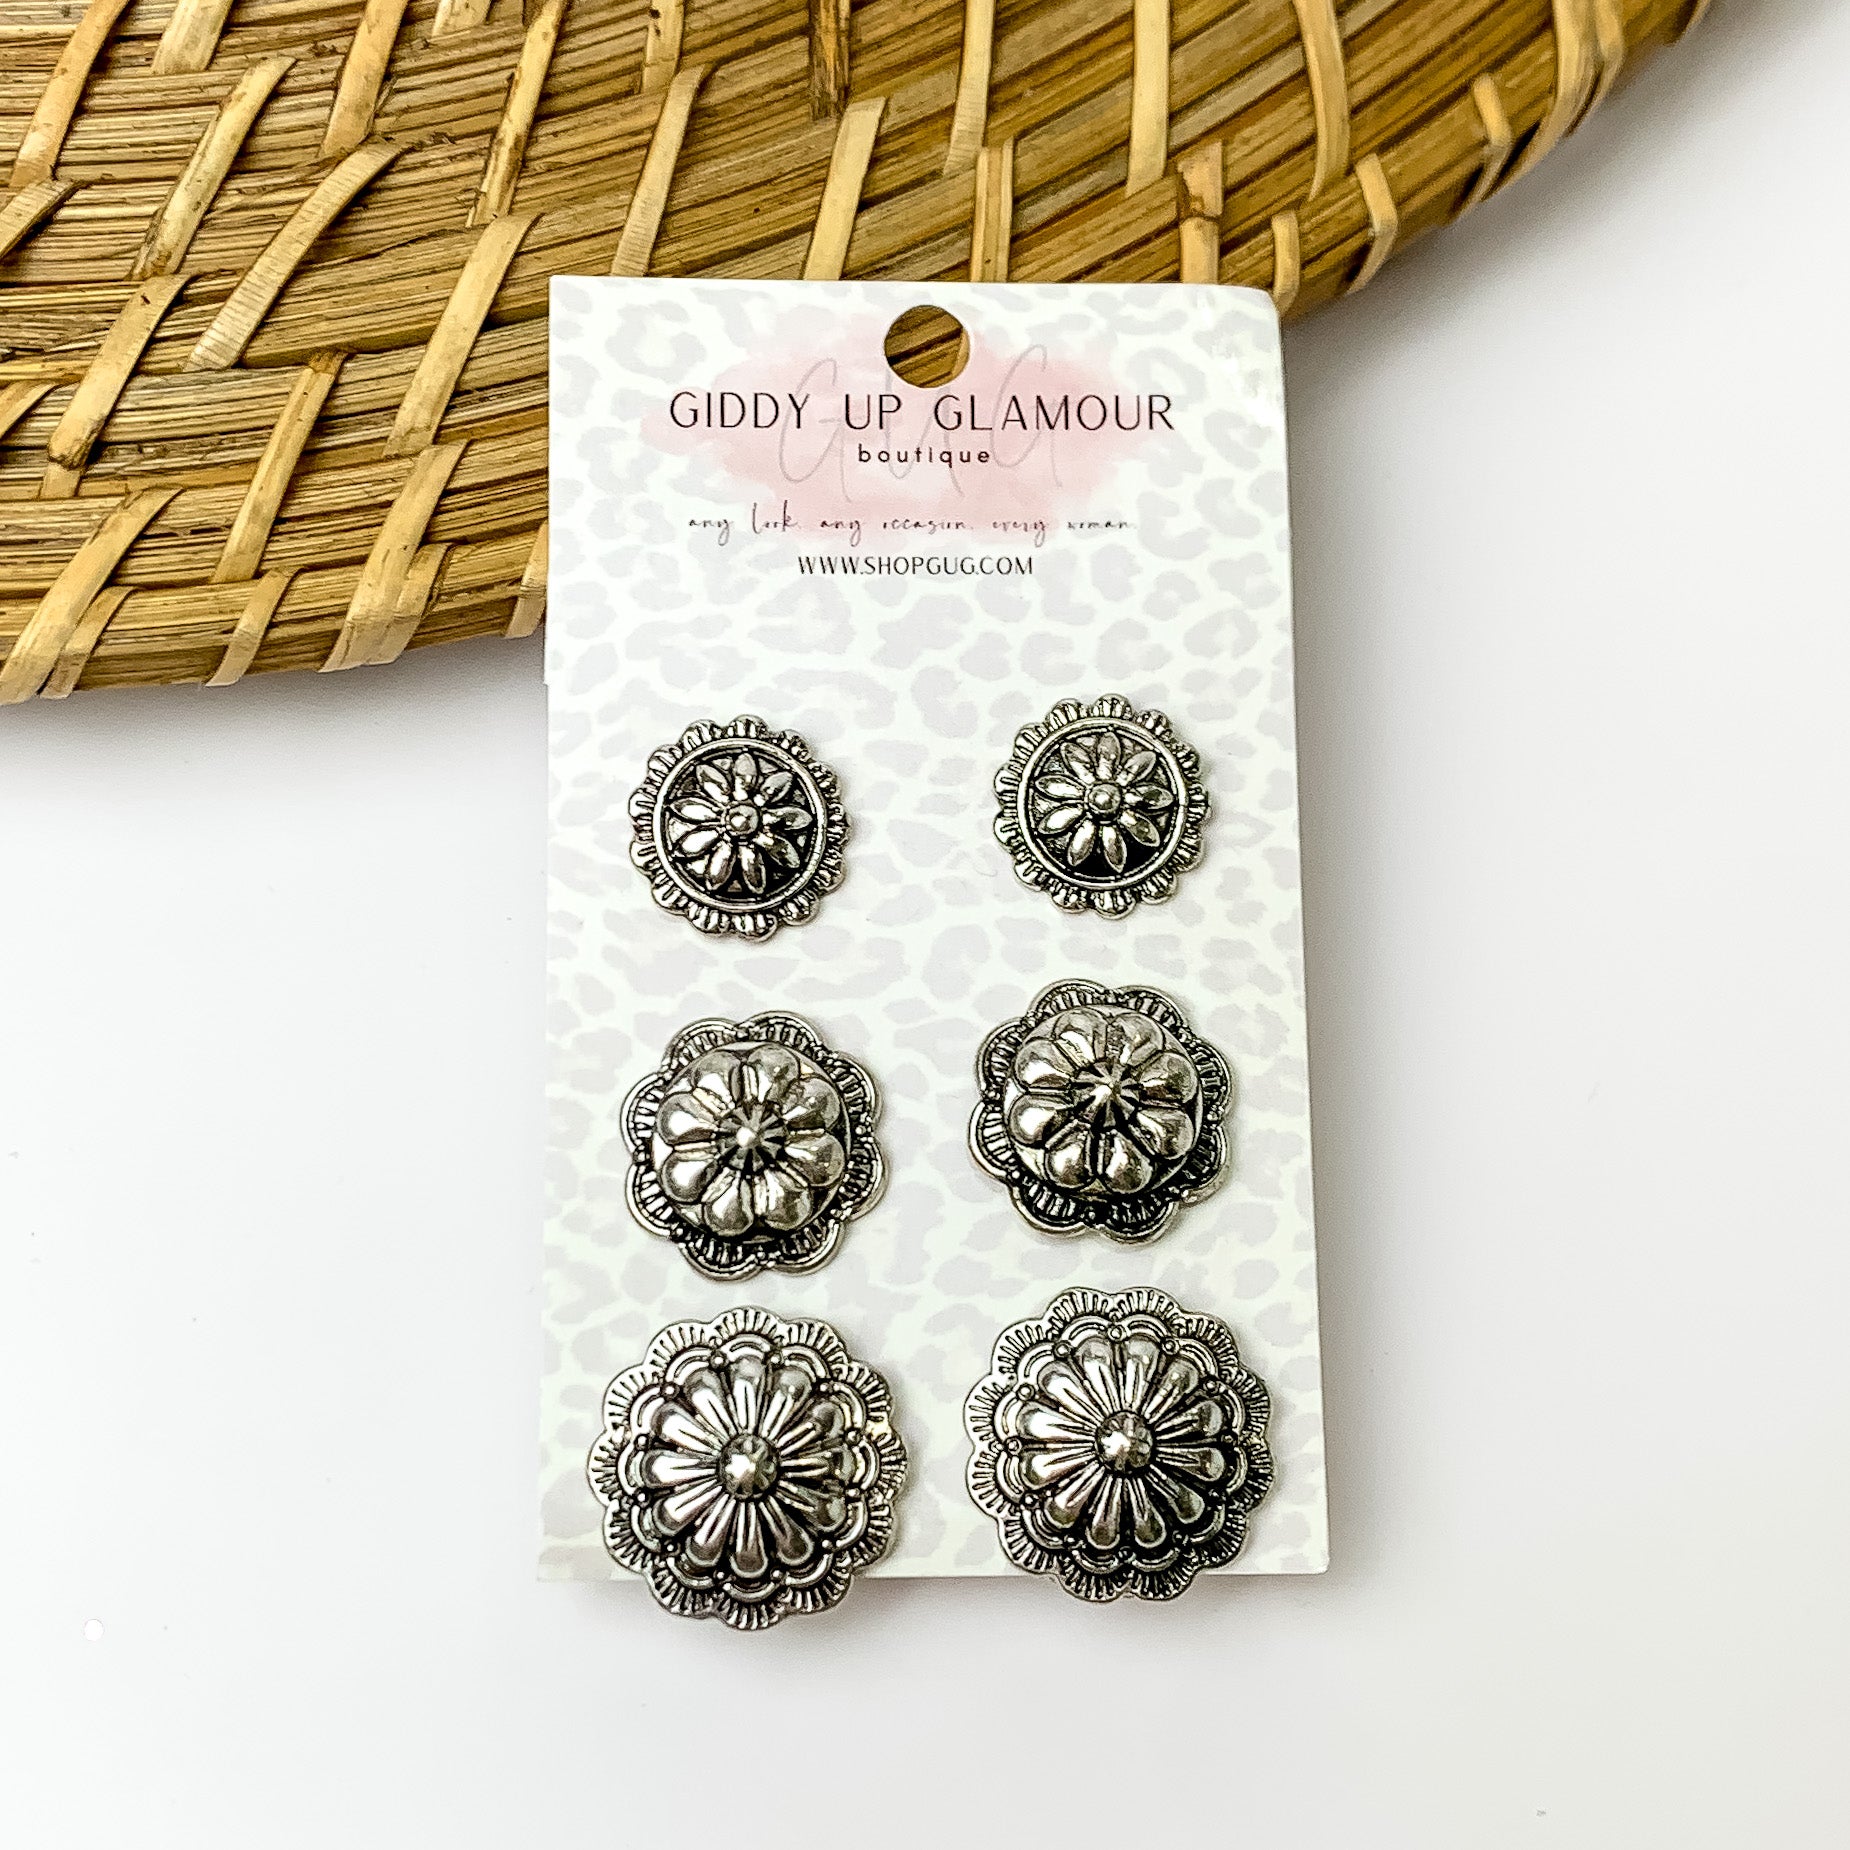 Three pairs of silver tone designed circular stud earrings. Pictured with a white background and a wood like decoration in the top left corner.